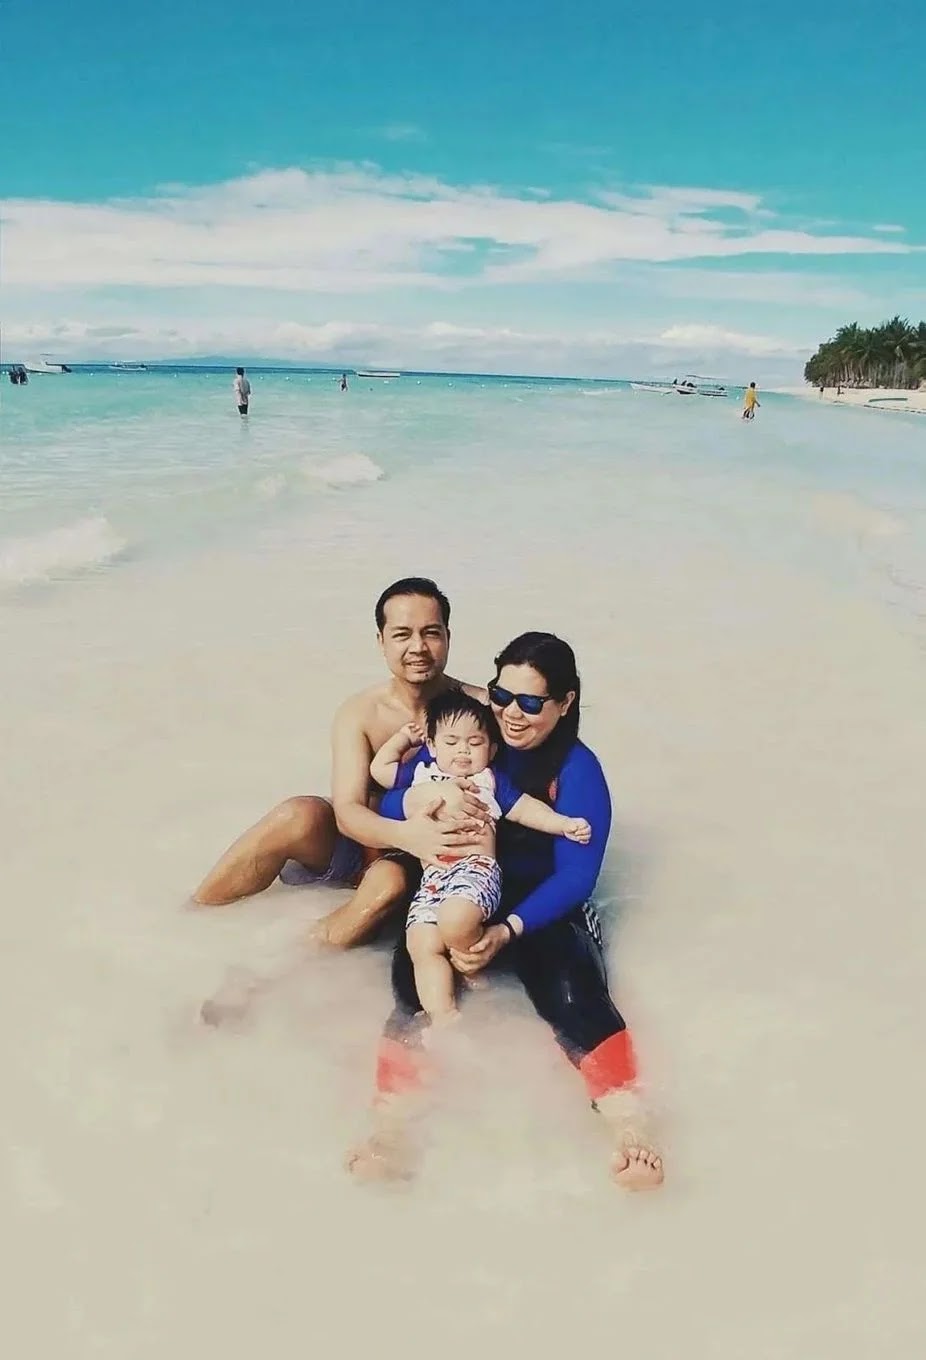 We took our Miguel for a swim at Dumaluan Beach Resort